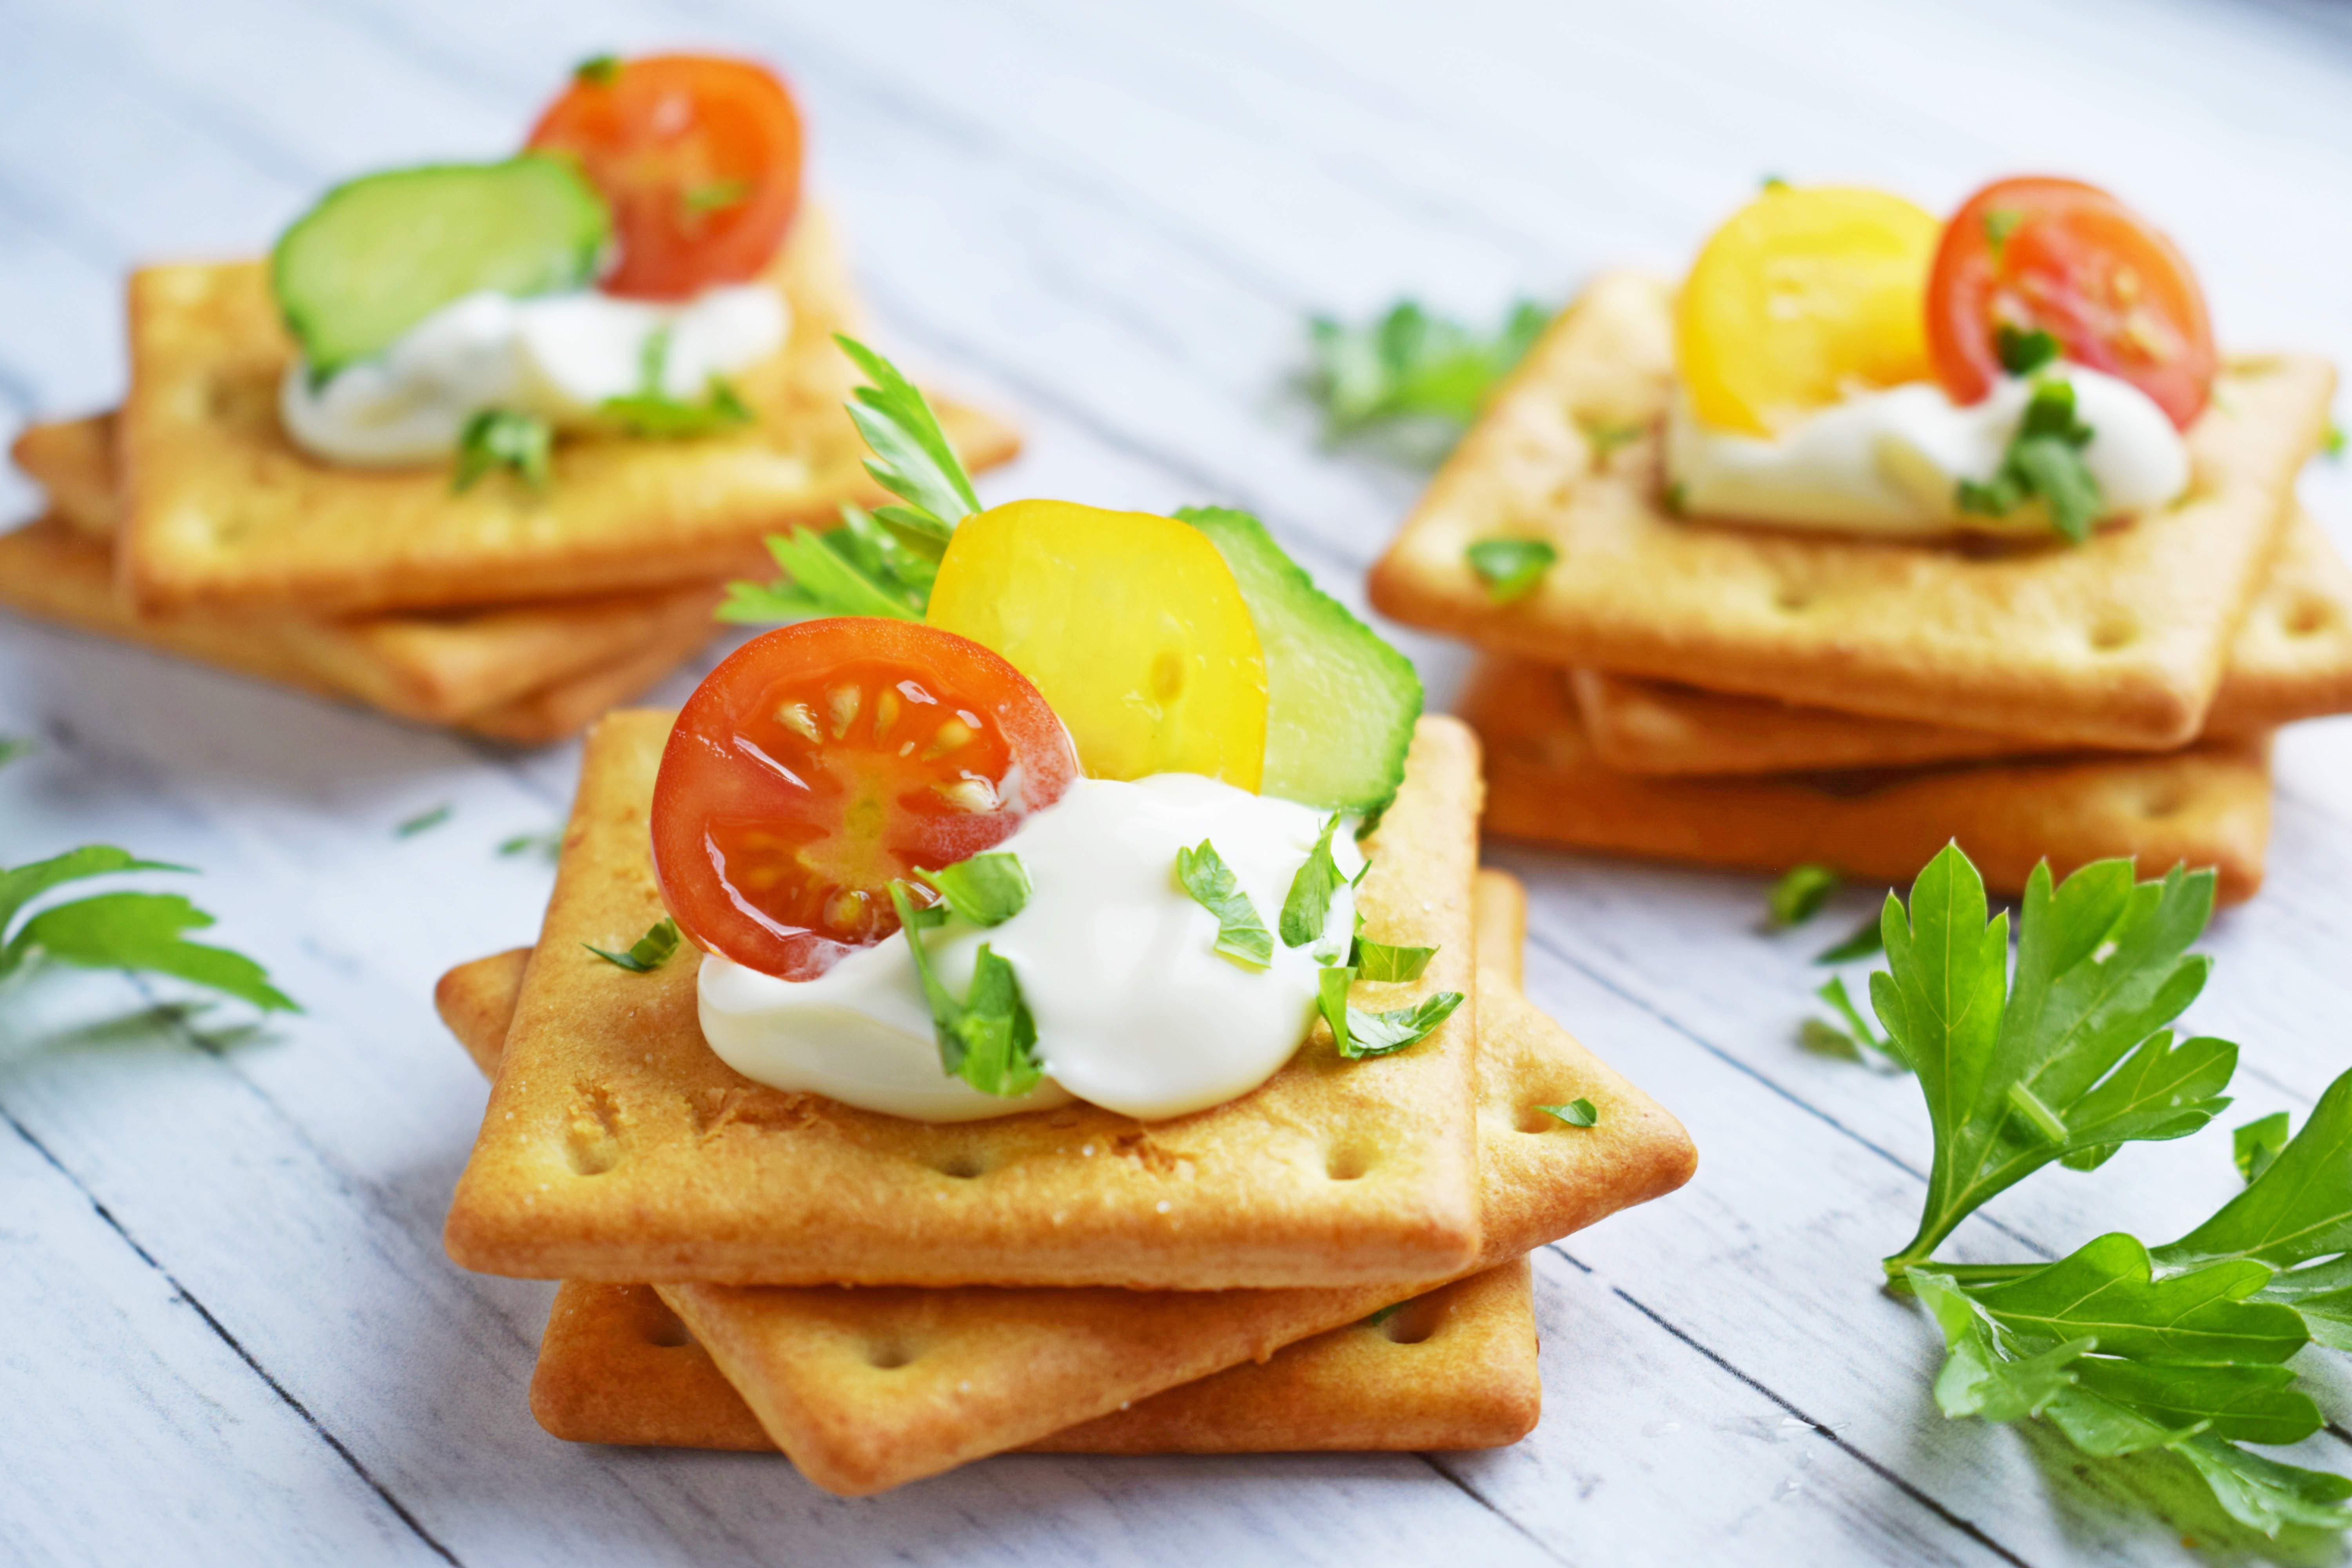 Delicious crackers with cheese sauce and vegetables.Snack on wooden background.